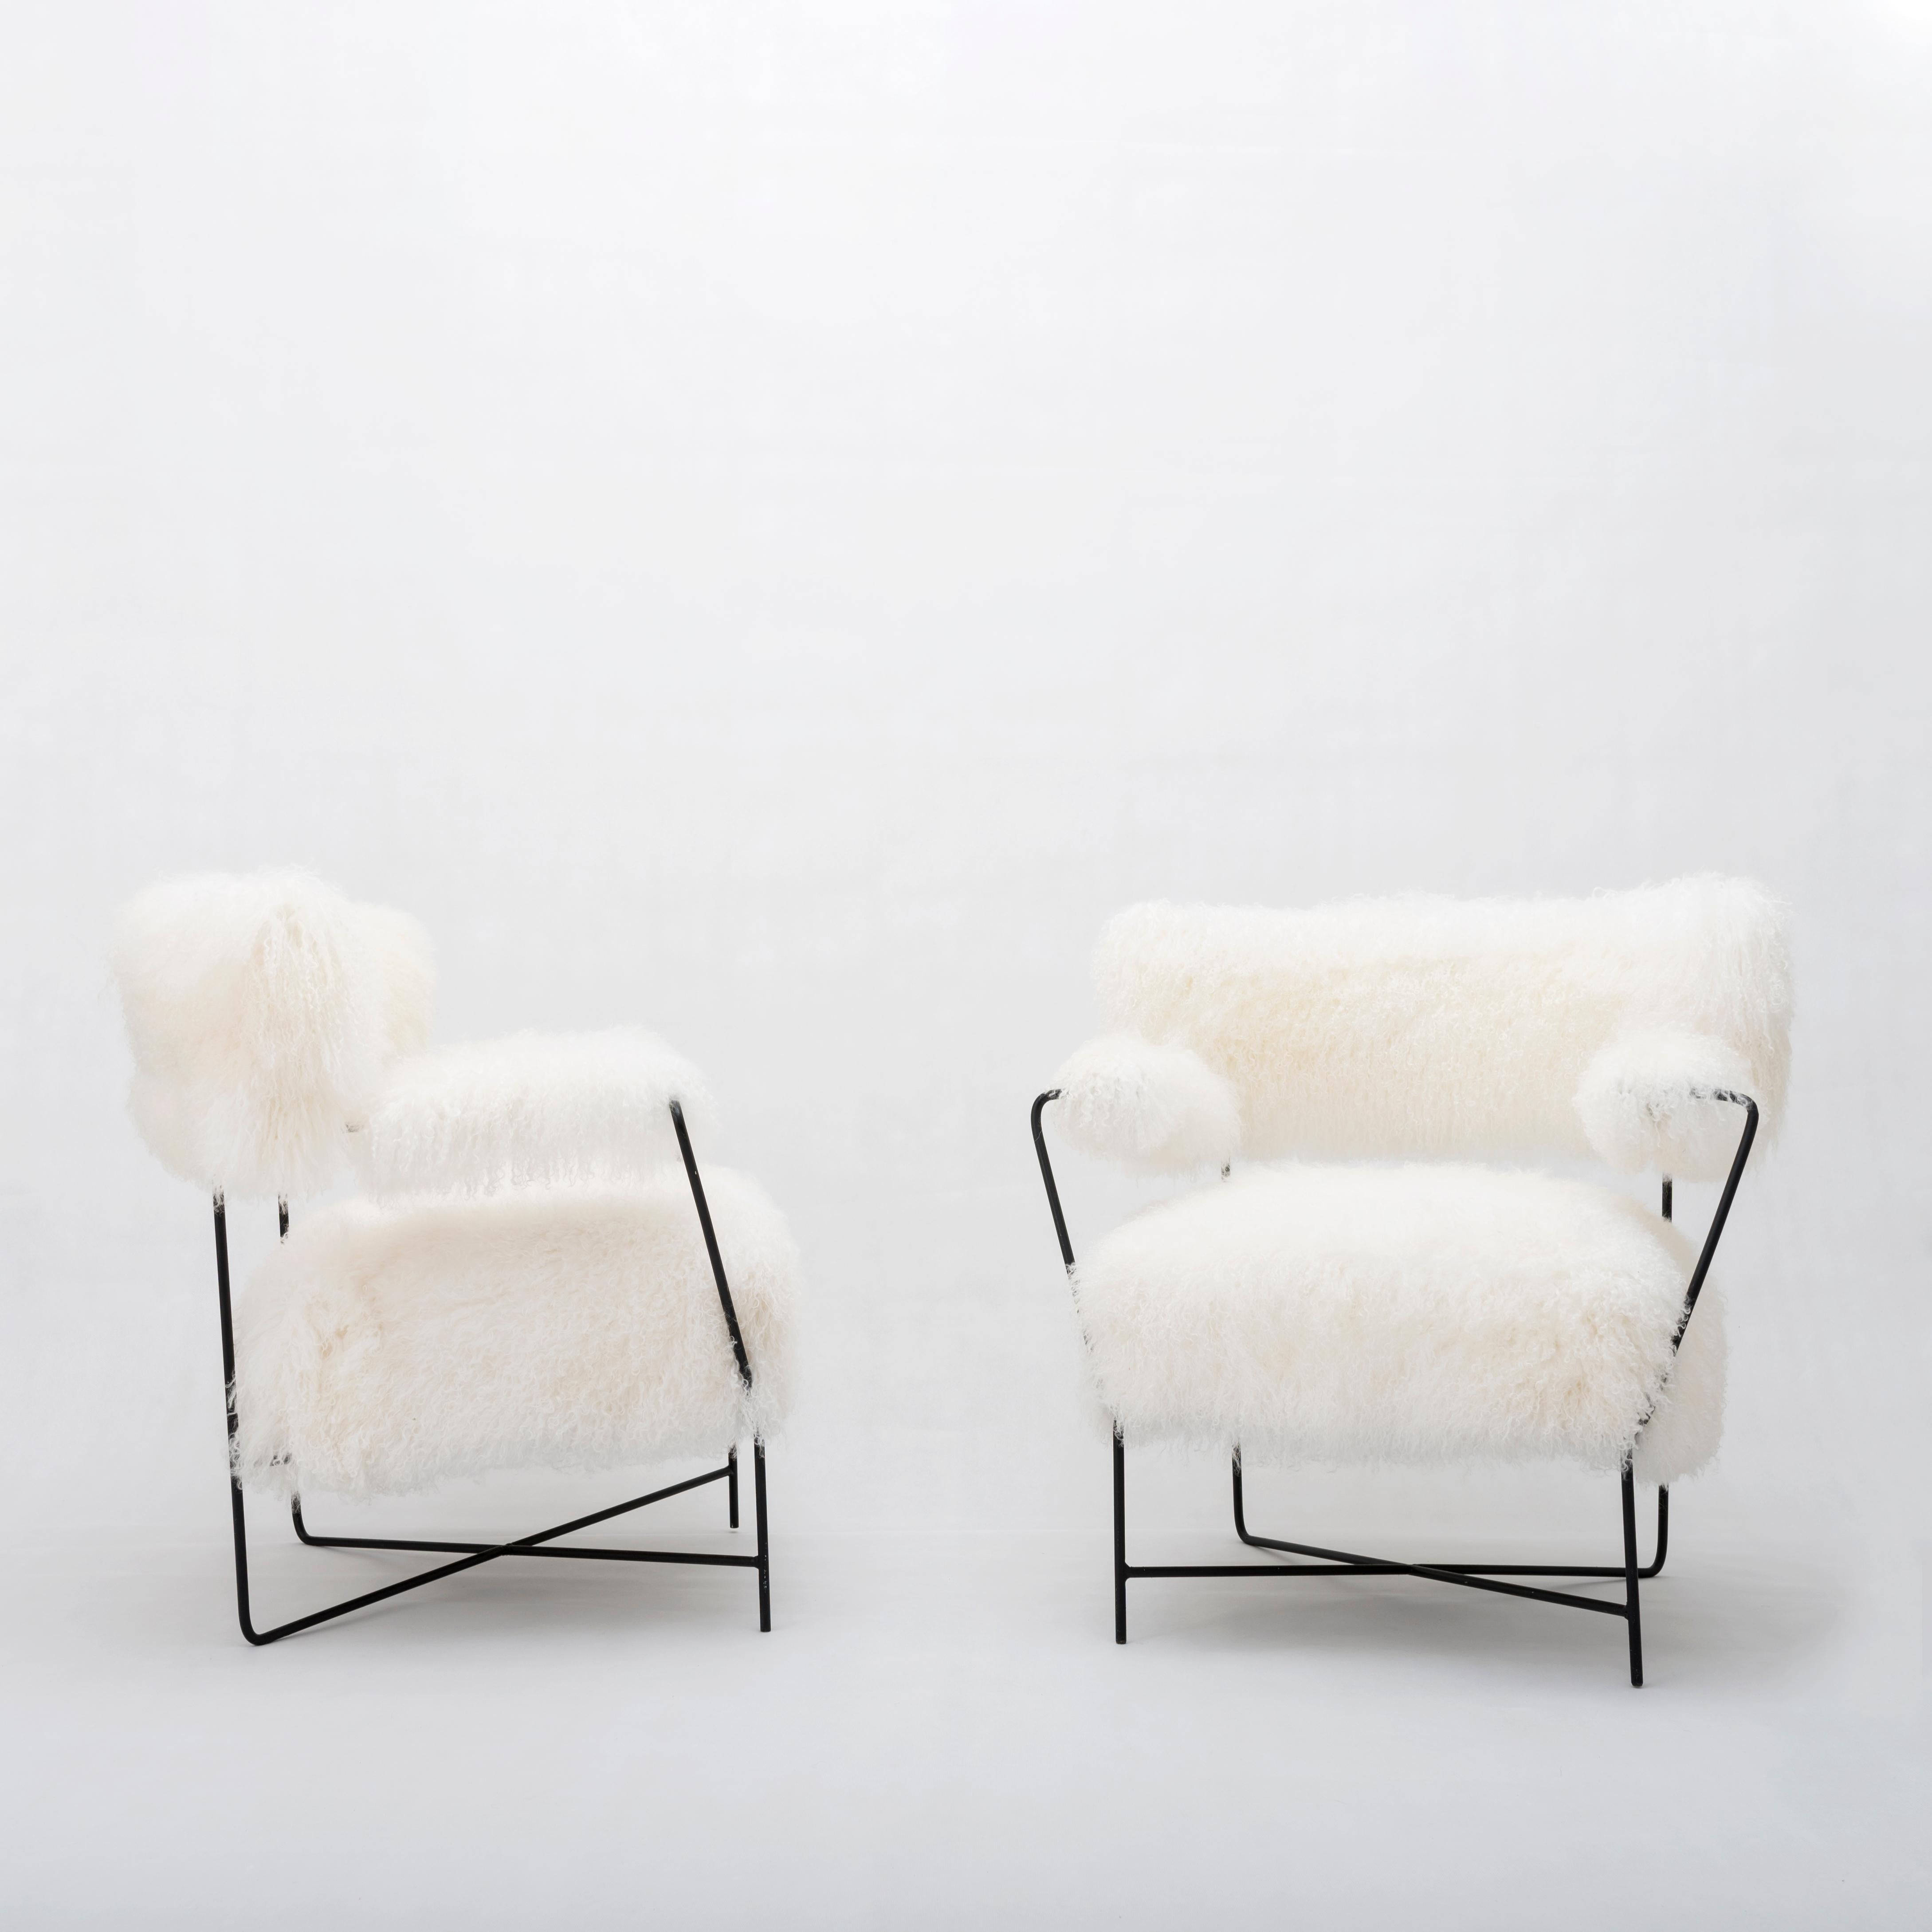 Attributed to Joaquim Tenreiro
Pair of armchairs
Upholstered in lambskin
Metal structure
Brazil, 1950s.